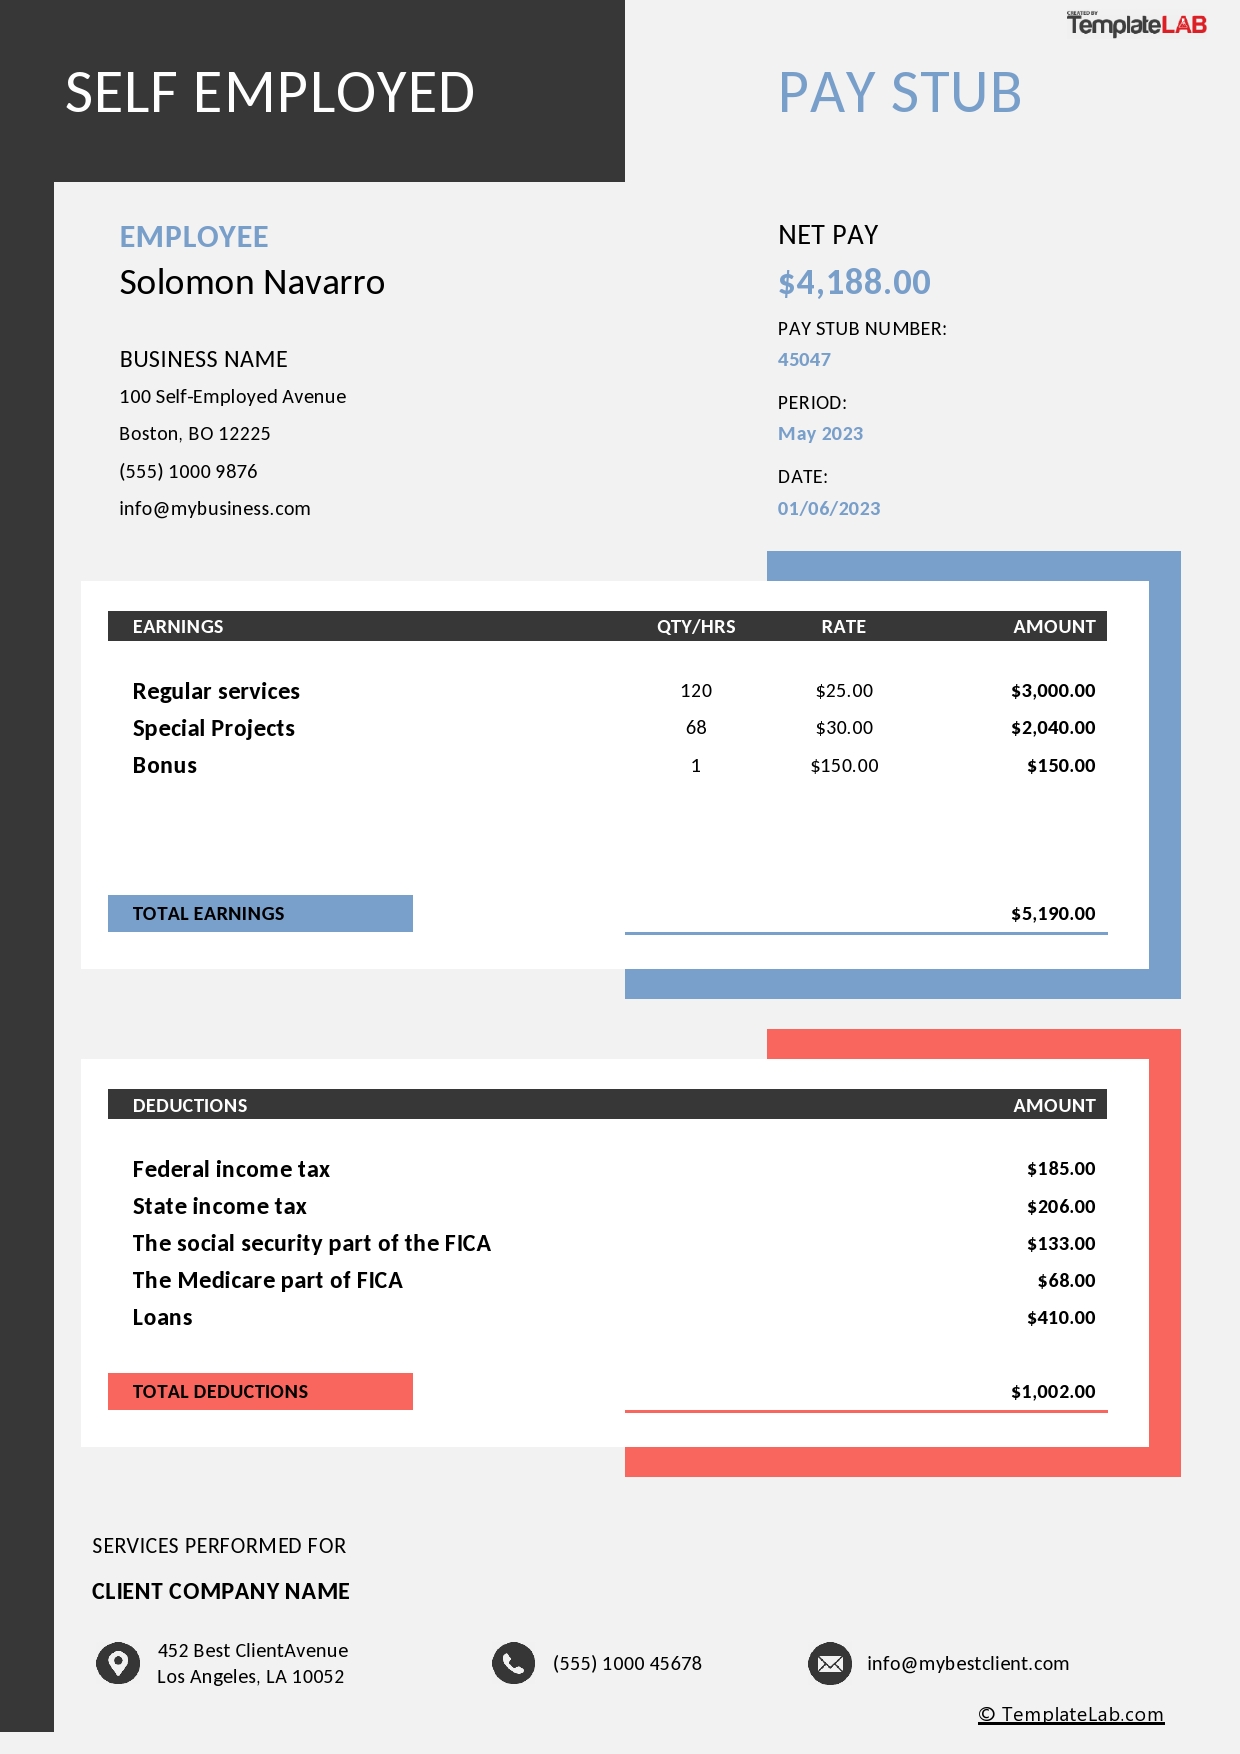 3 Tips to Choose the Perfect Pay Stub Template for your Business